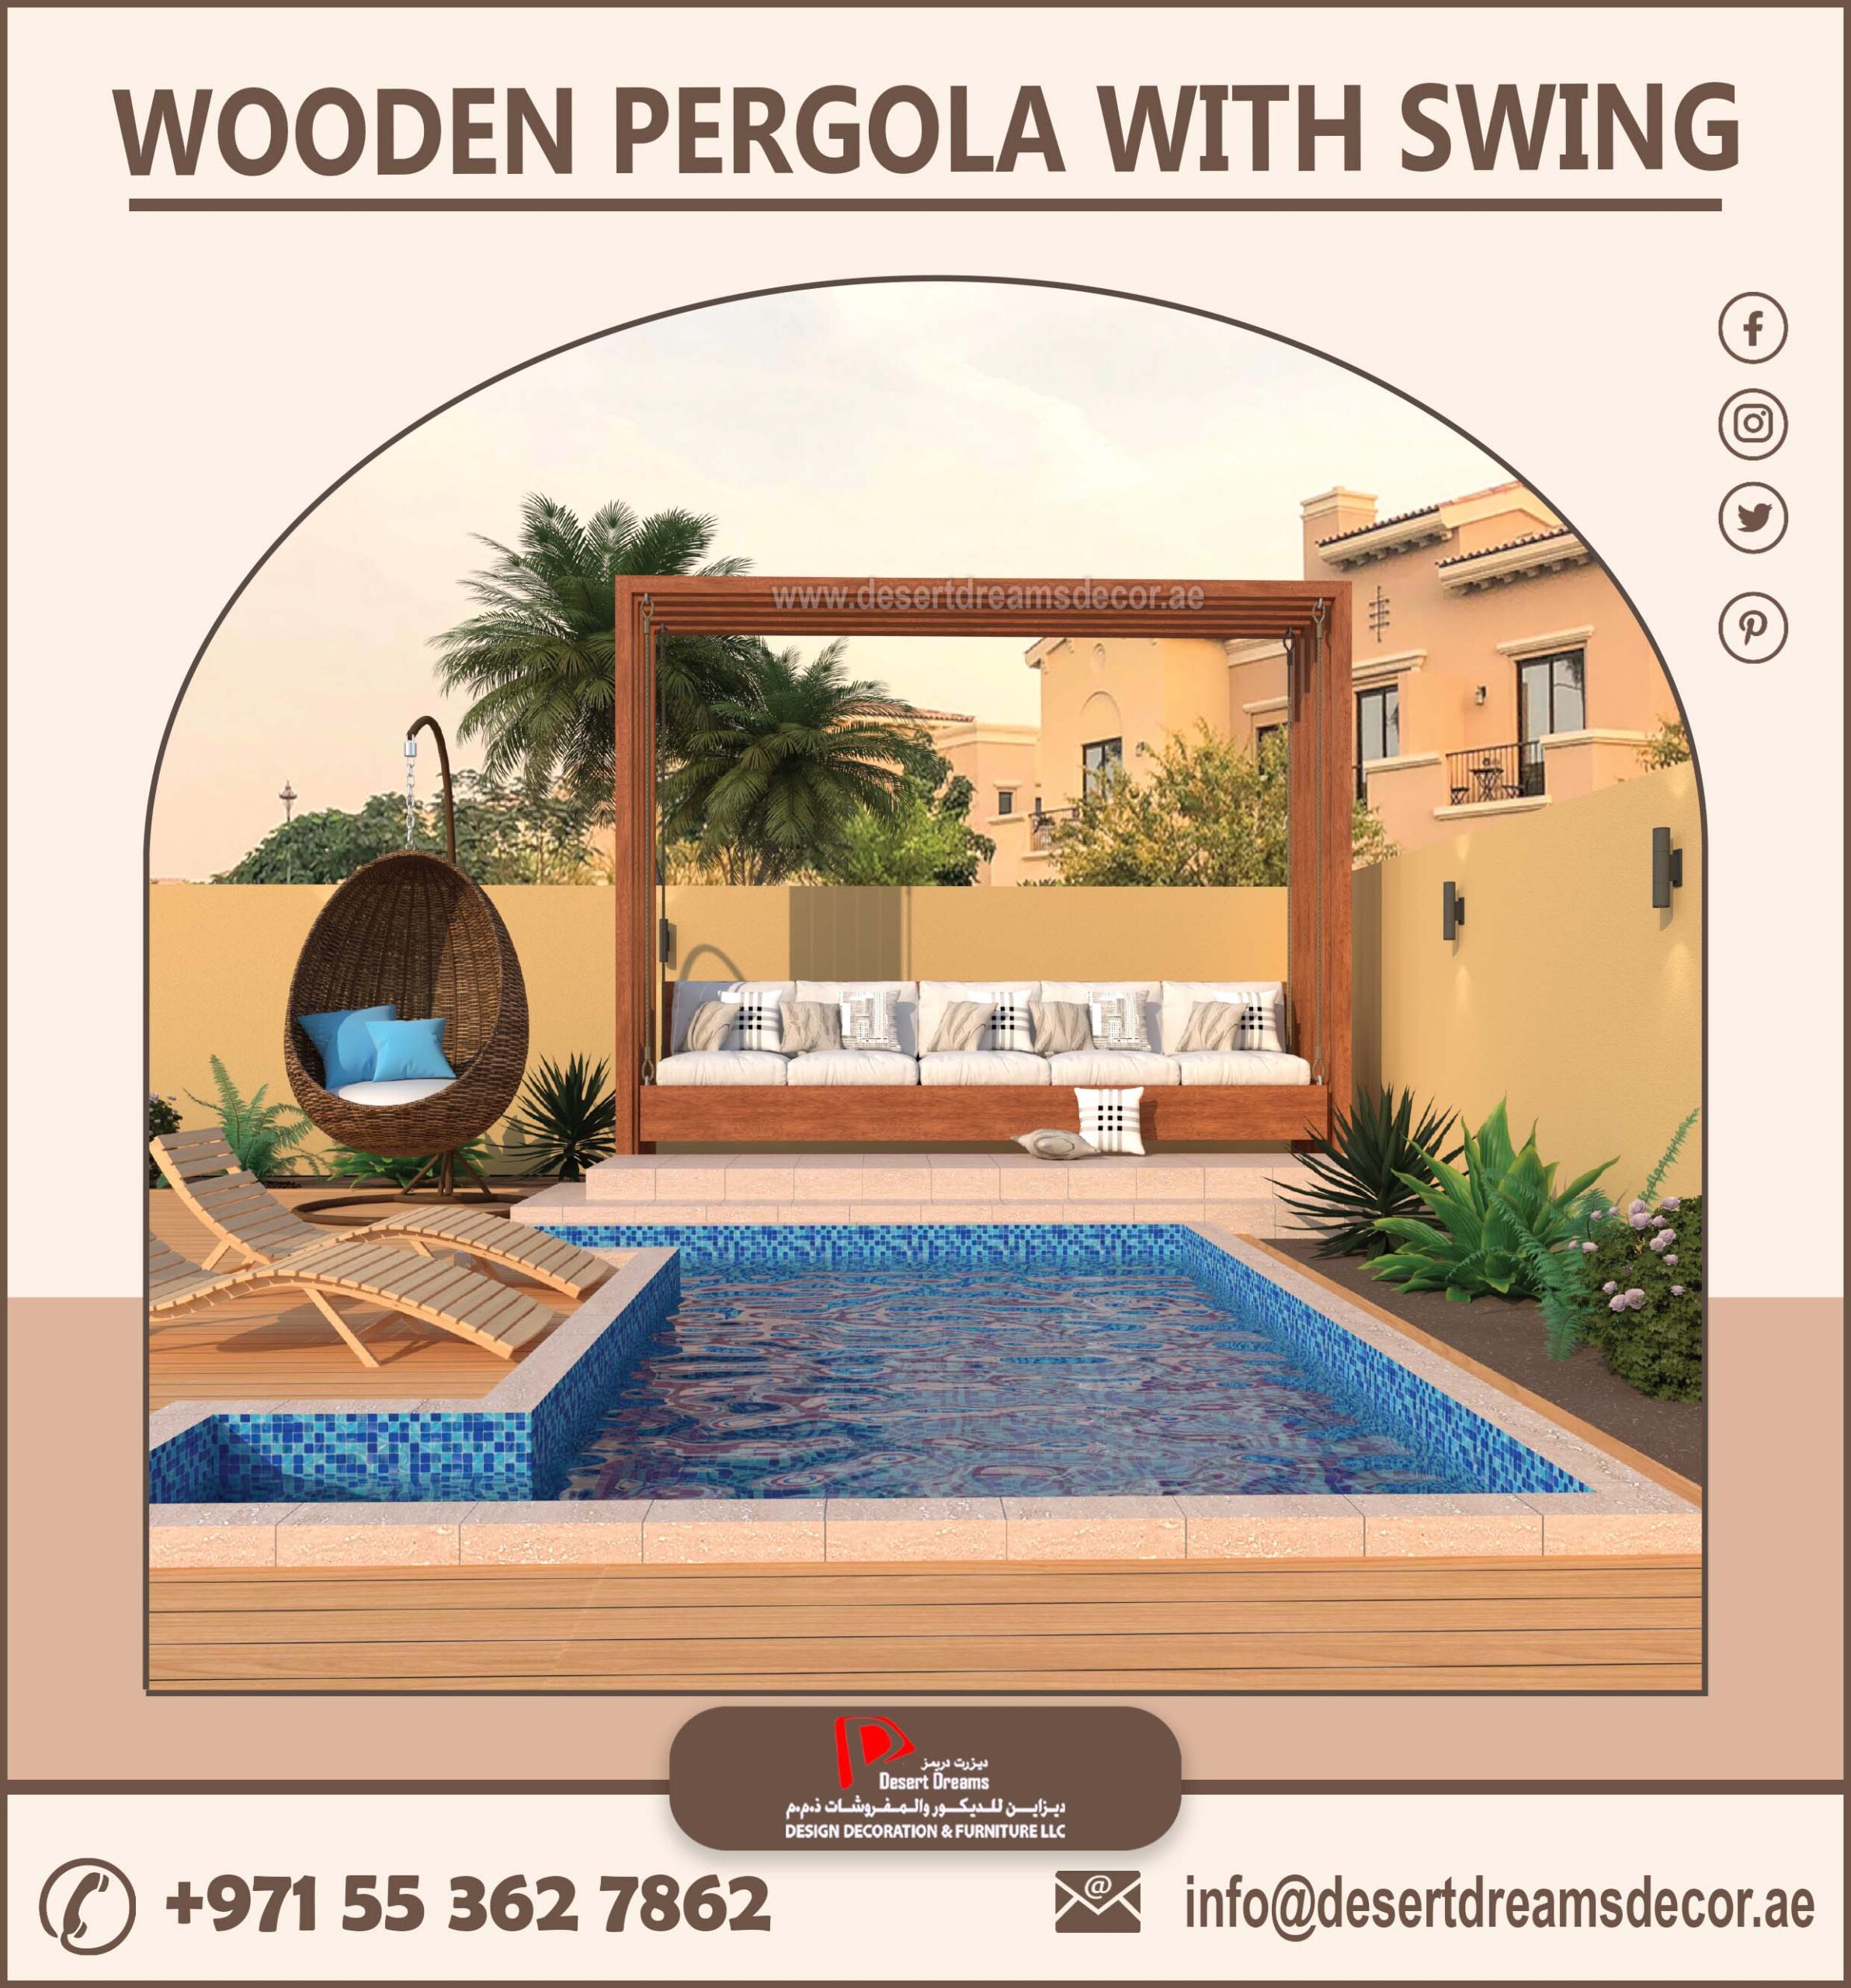 Wooden Pergola with Swing Bed Uae.